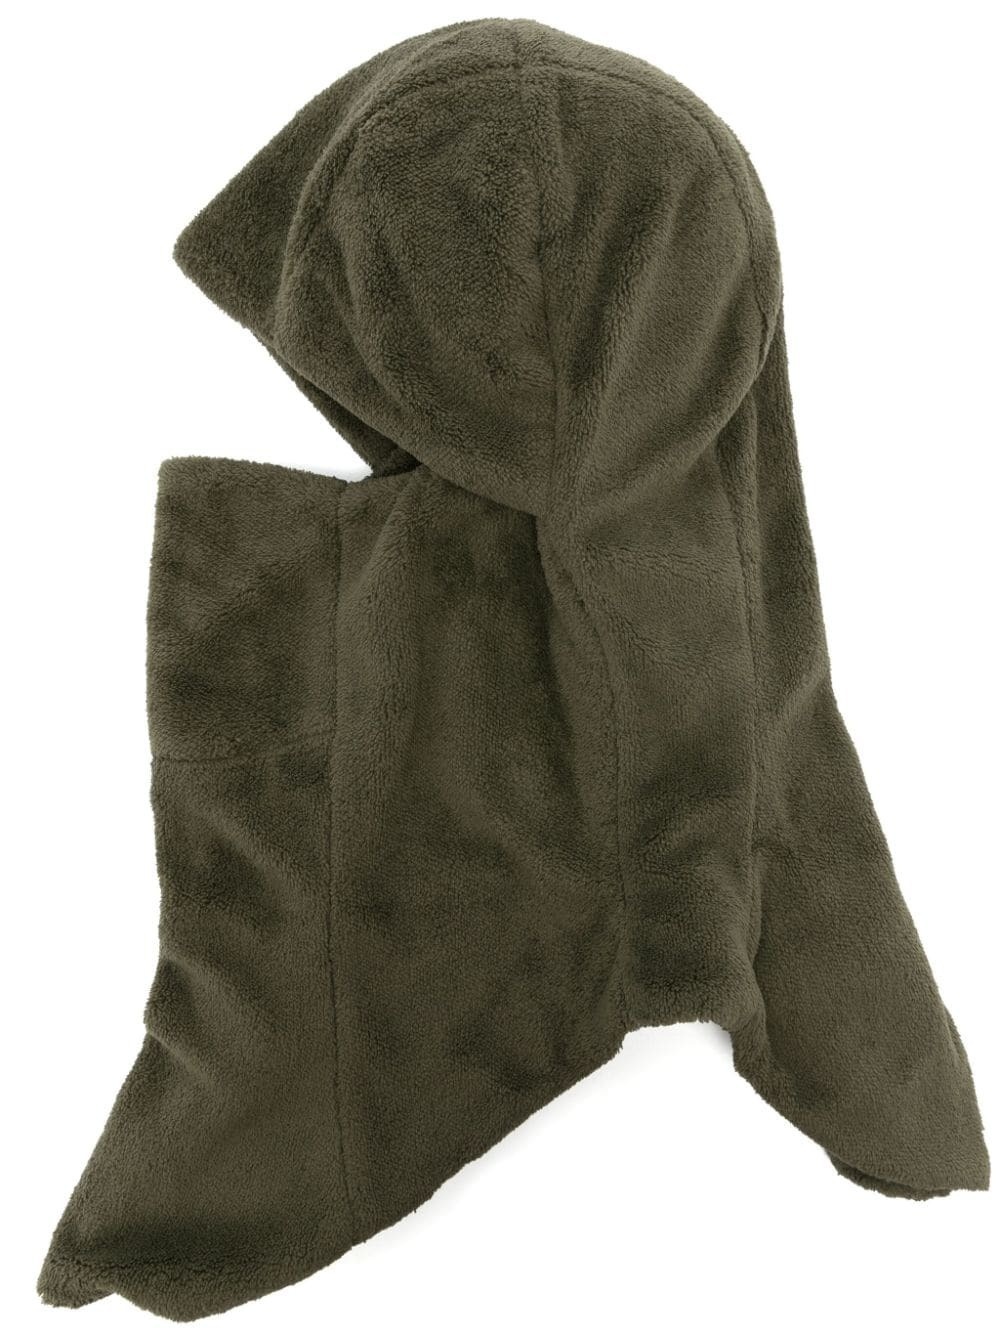 Photo: POST ARCHIVE FACTION (PAF) - 5.1 Balaclava Right (olive Green)